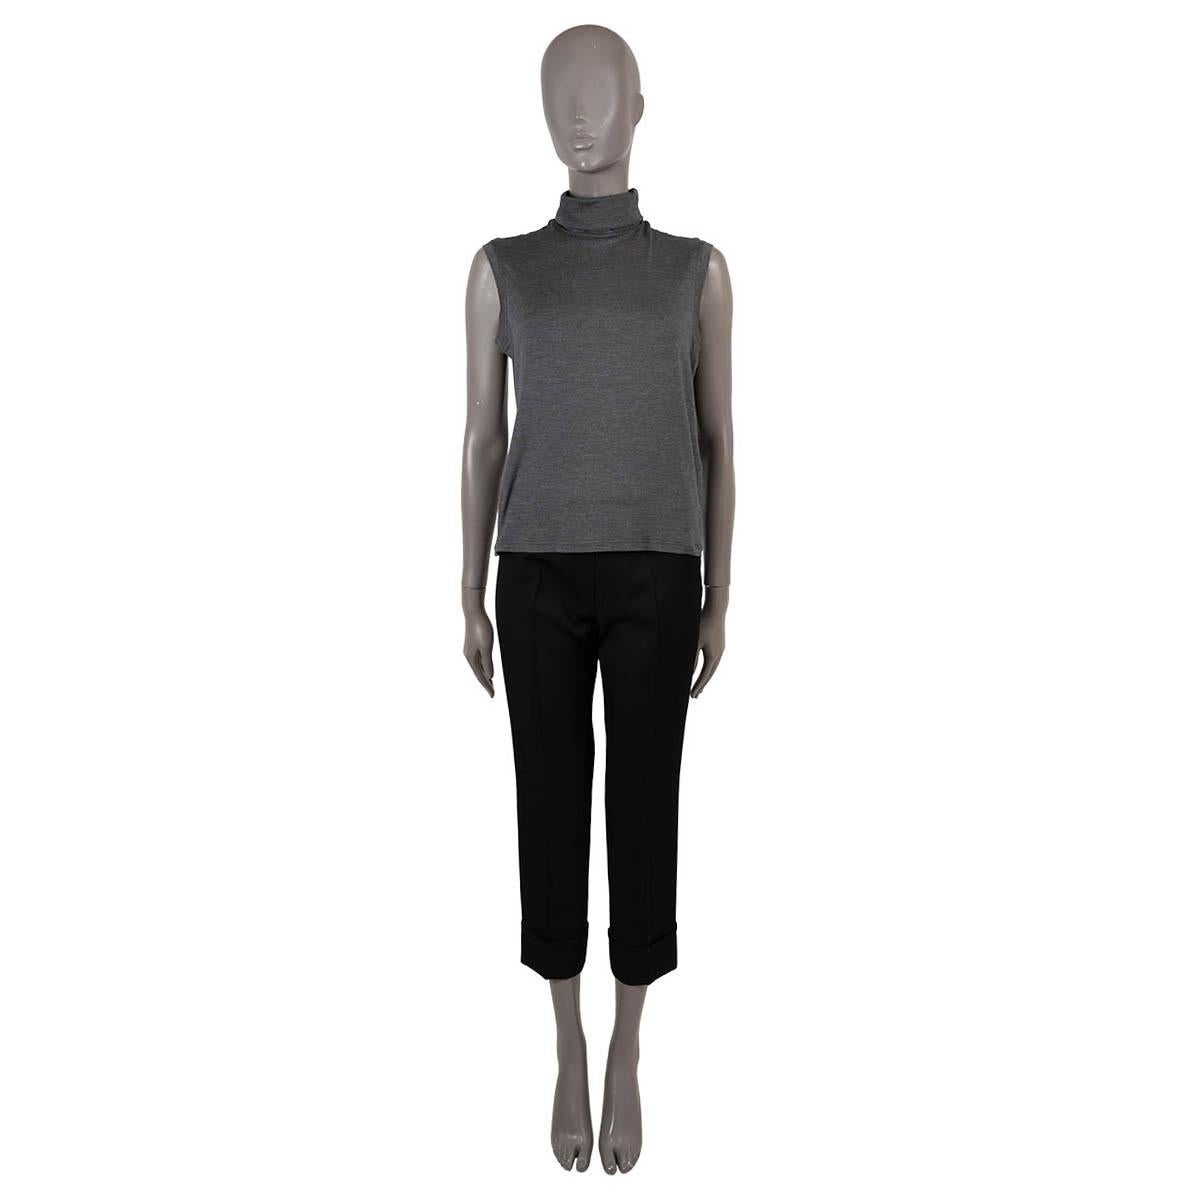 100% authentic Hermès sleeveless turtleneck sweater in grey silk (93%) and elastane (7%). Has been worn and is in excellent condition. 

Measurements
Tag Size	40
Size	M
Shoulder Width	37cm (14.4in)
Bust From	94cm (36.7in)
Waist From	94cm